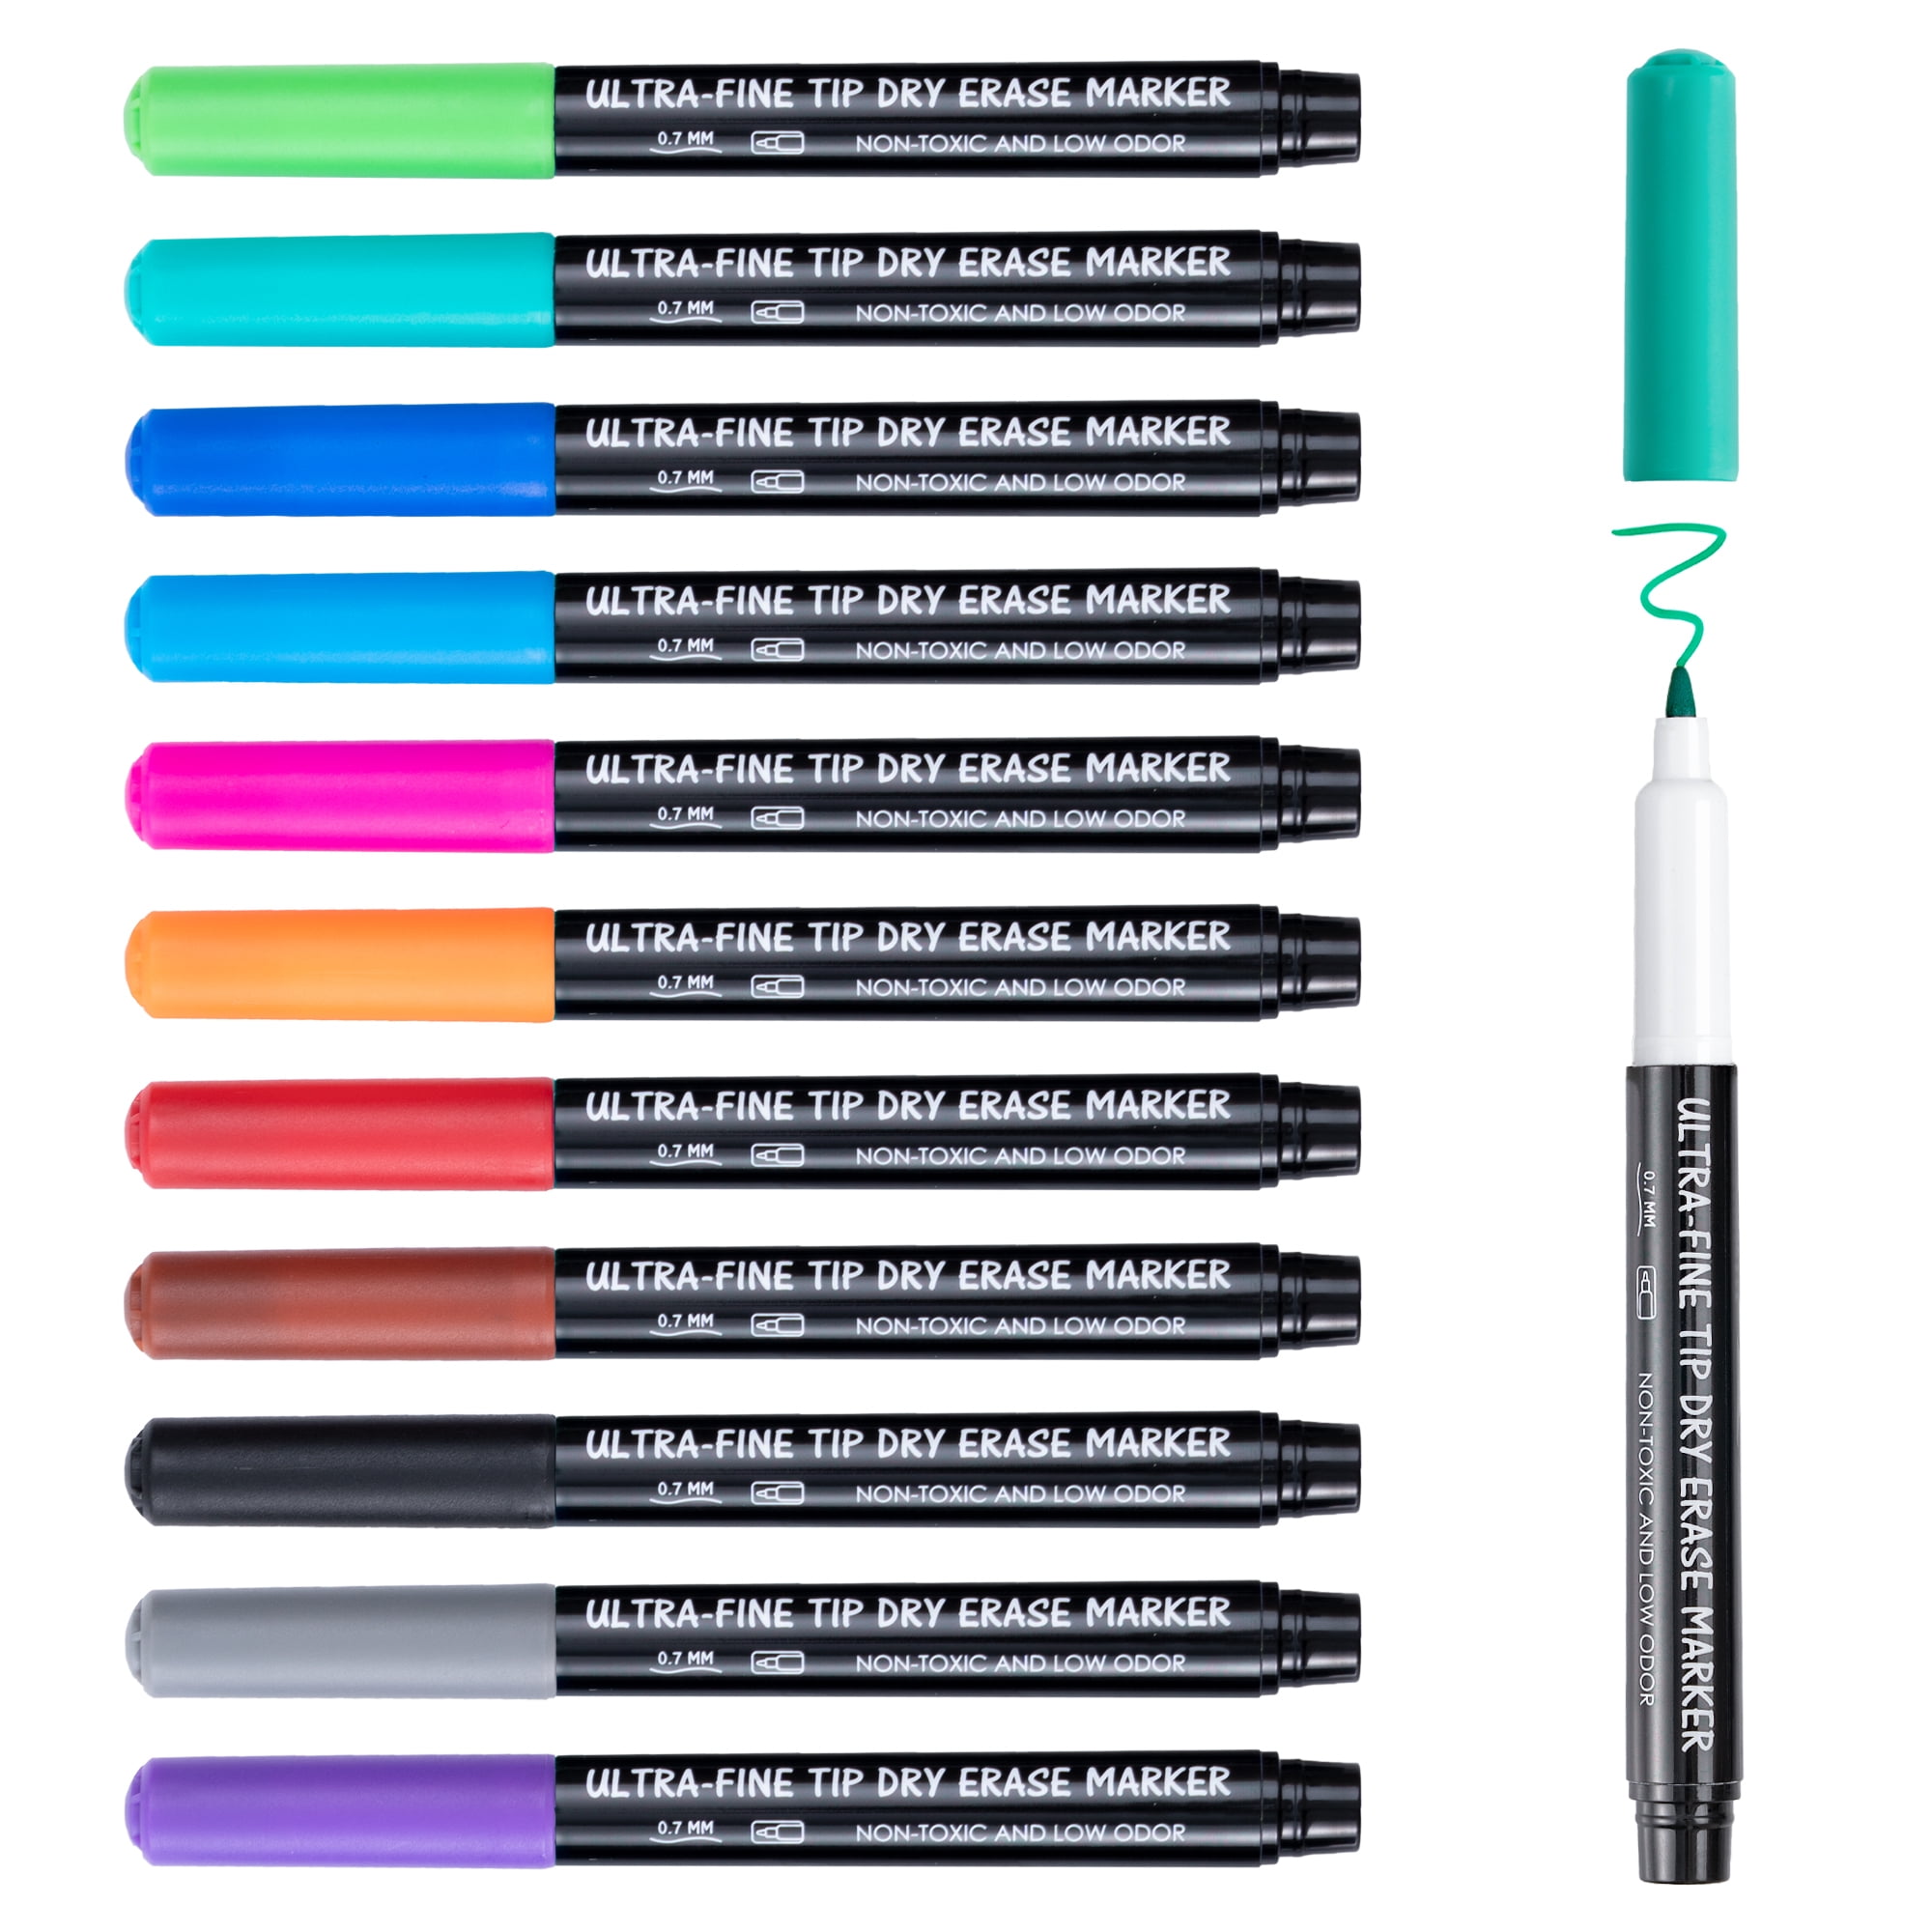  40 Pack of Dry Erase Markers (12 ASSORTED COLORS W/ 7